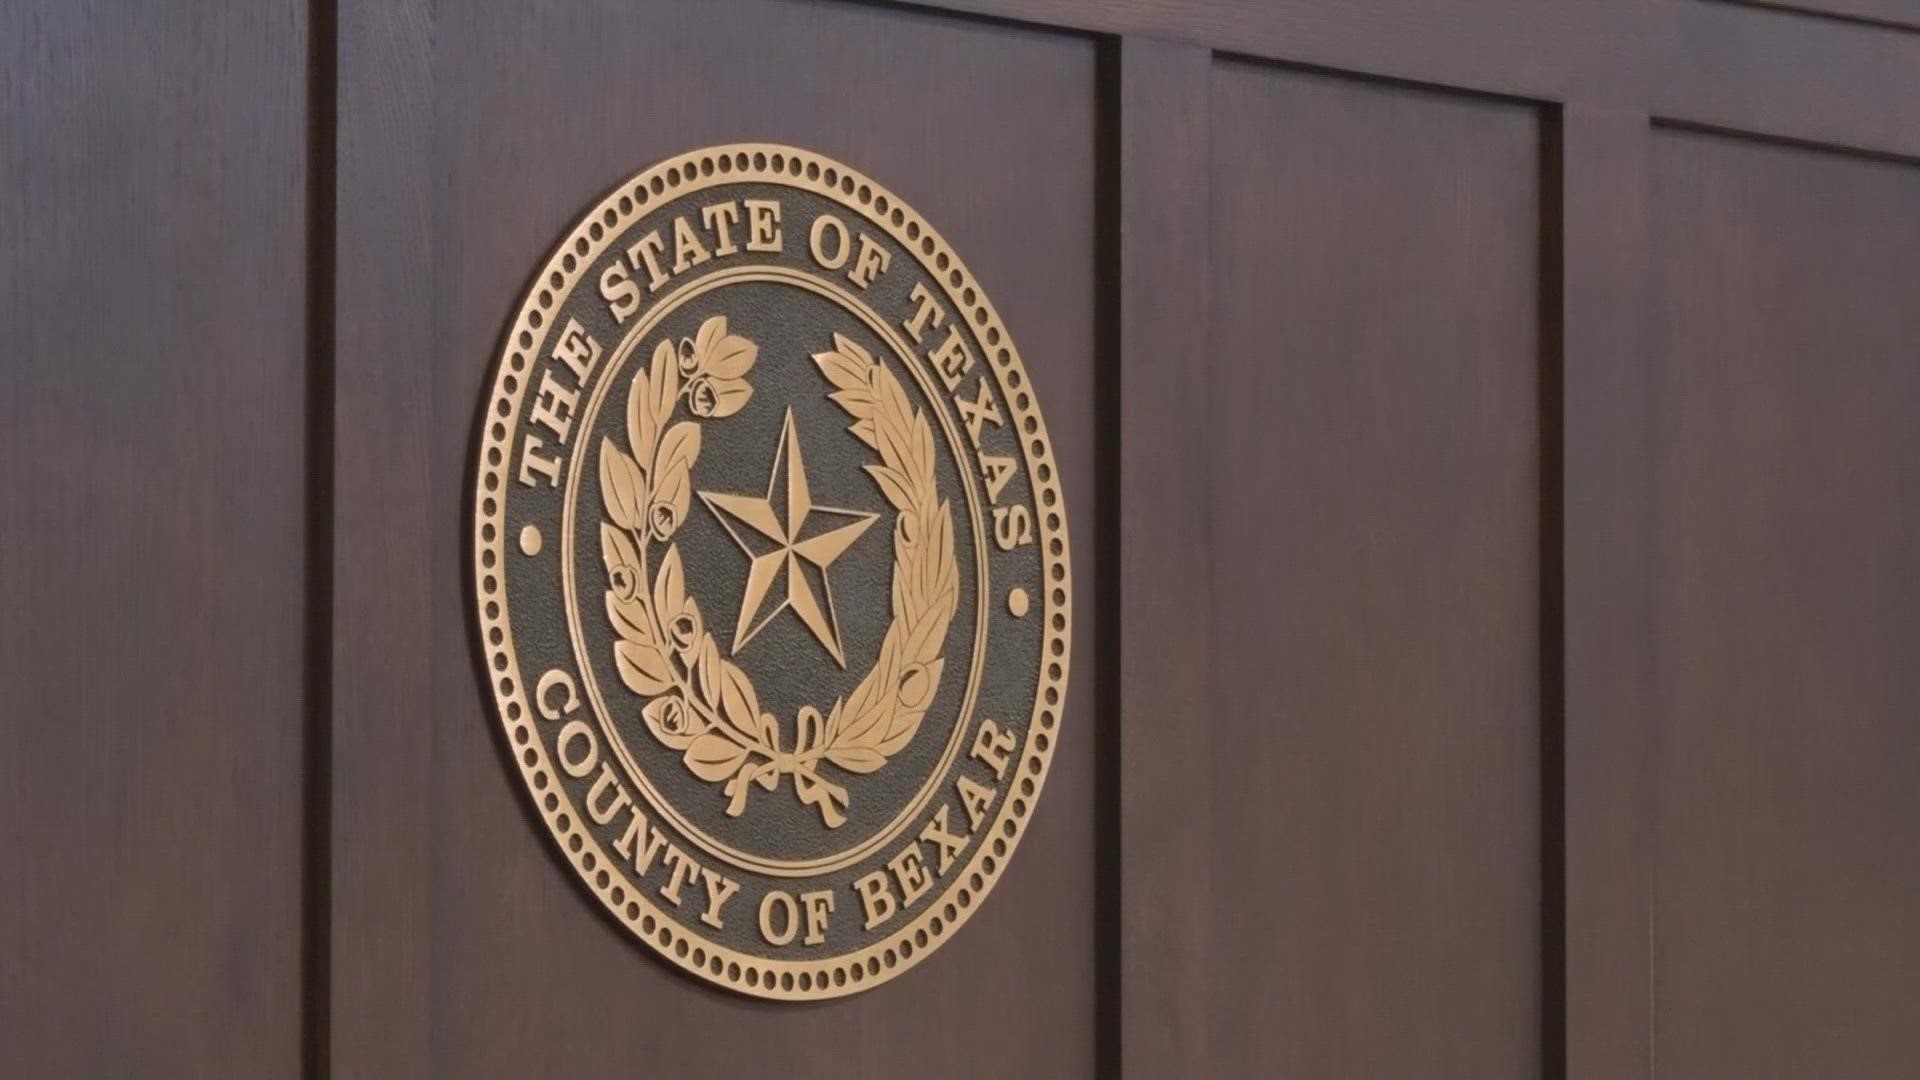 Bexar County will launch a program addressing gun safety and expand mental health resources in schools following the shooting in Uvalde.